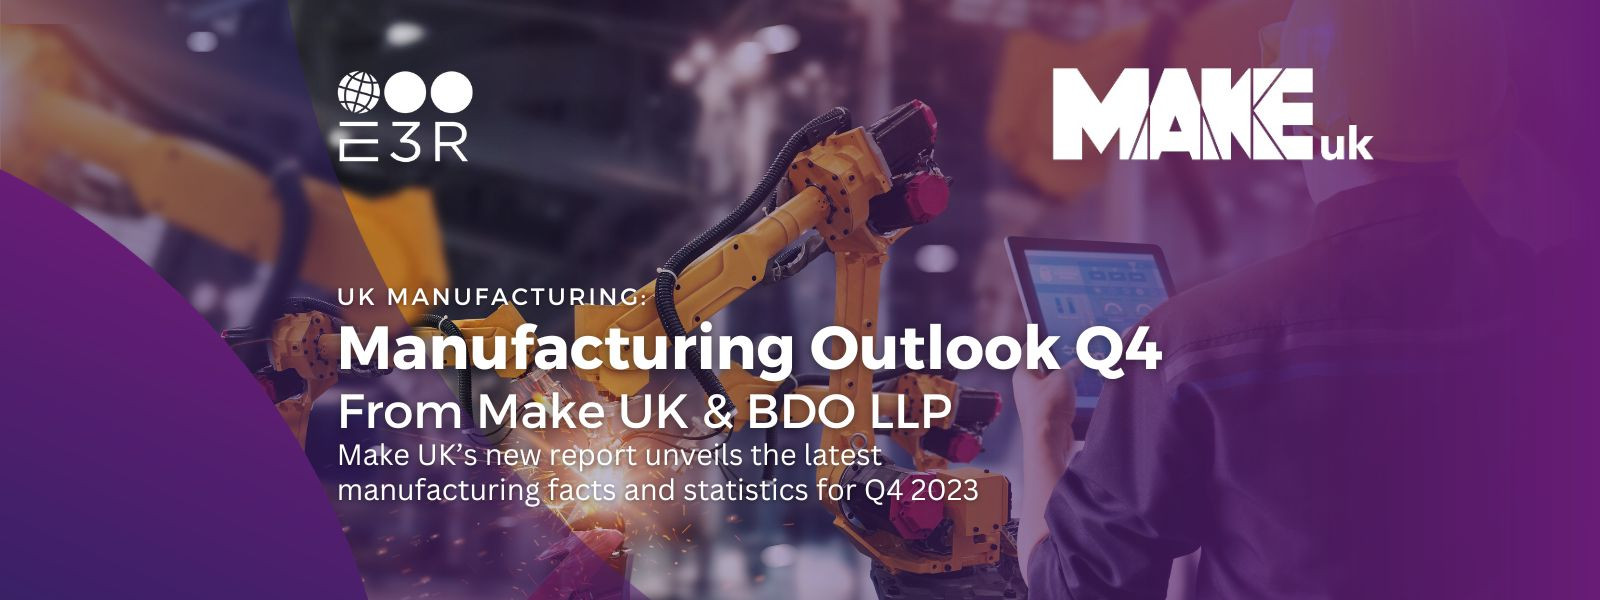 Insights from the Manufacturing Outlook 2023 Quarter 4